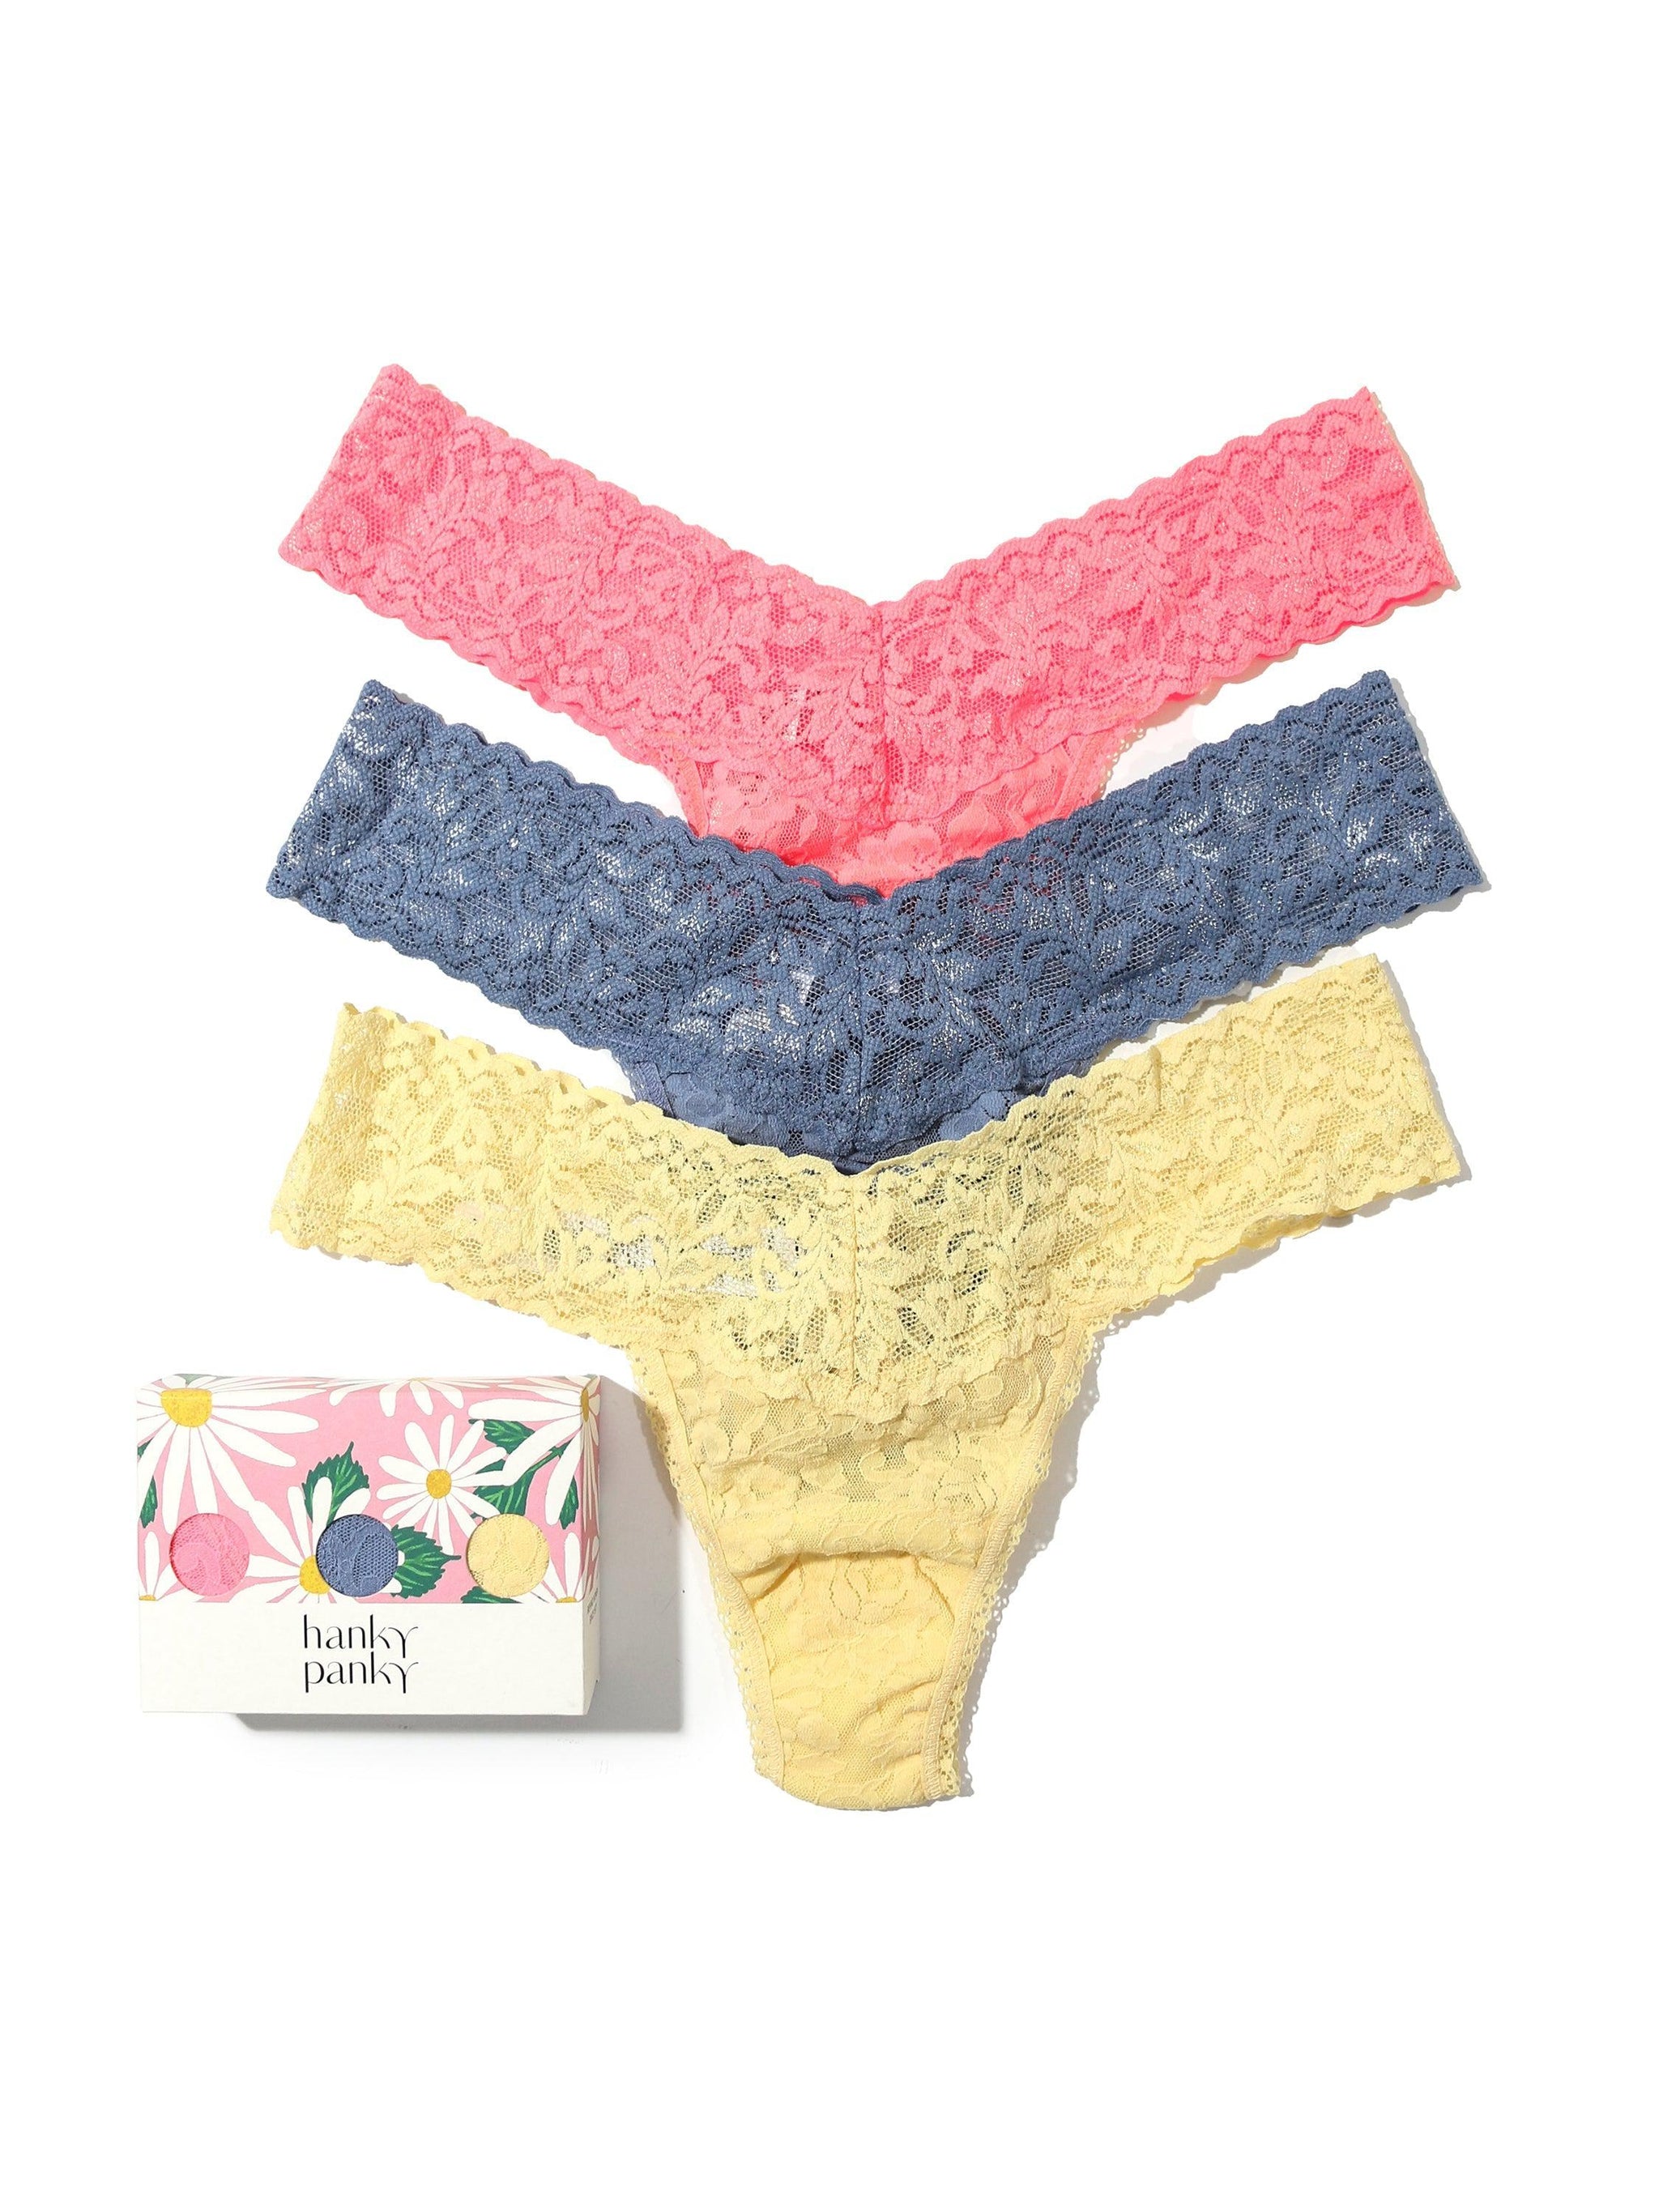 3 Pack Petite Size Signature Lace Thongs in Printed Box Sale